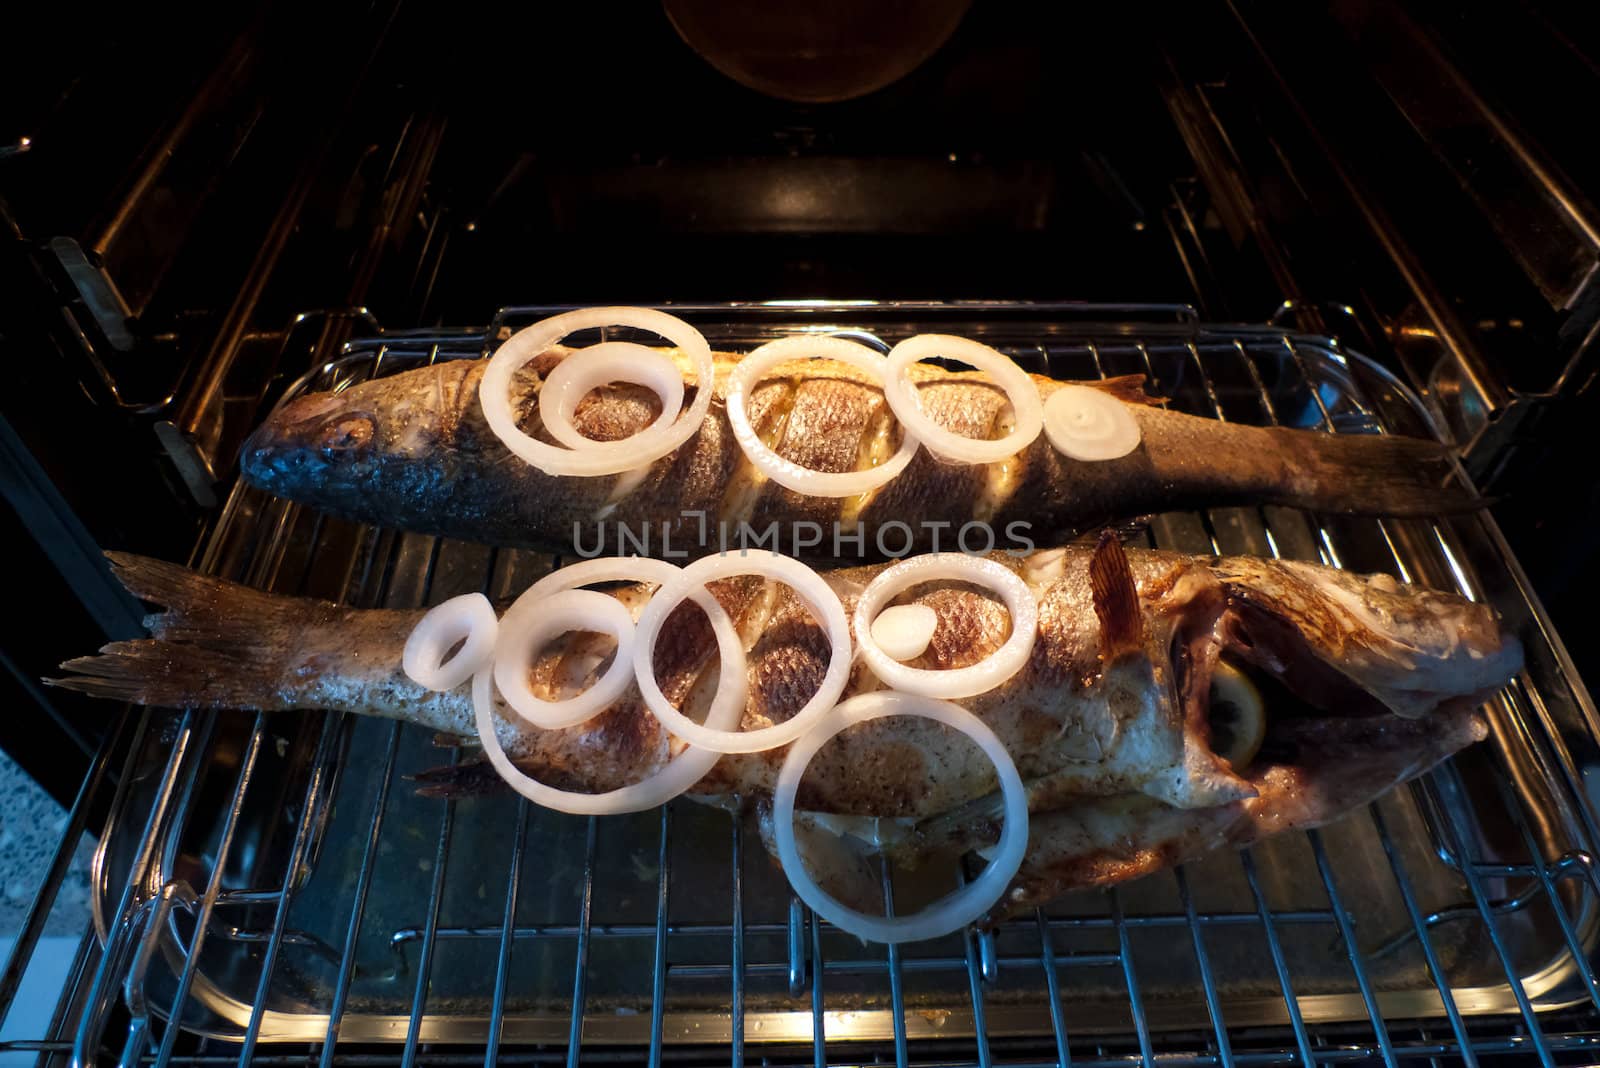 Photo of two grilled fishes by anobis